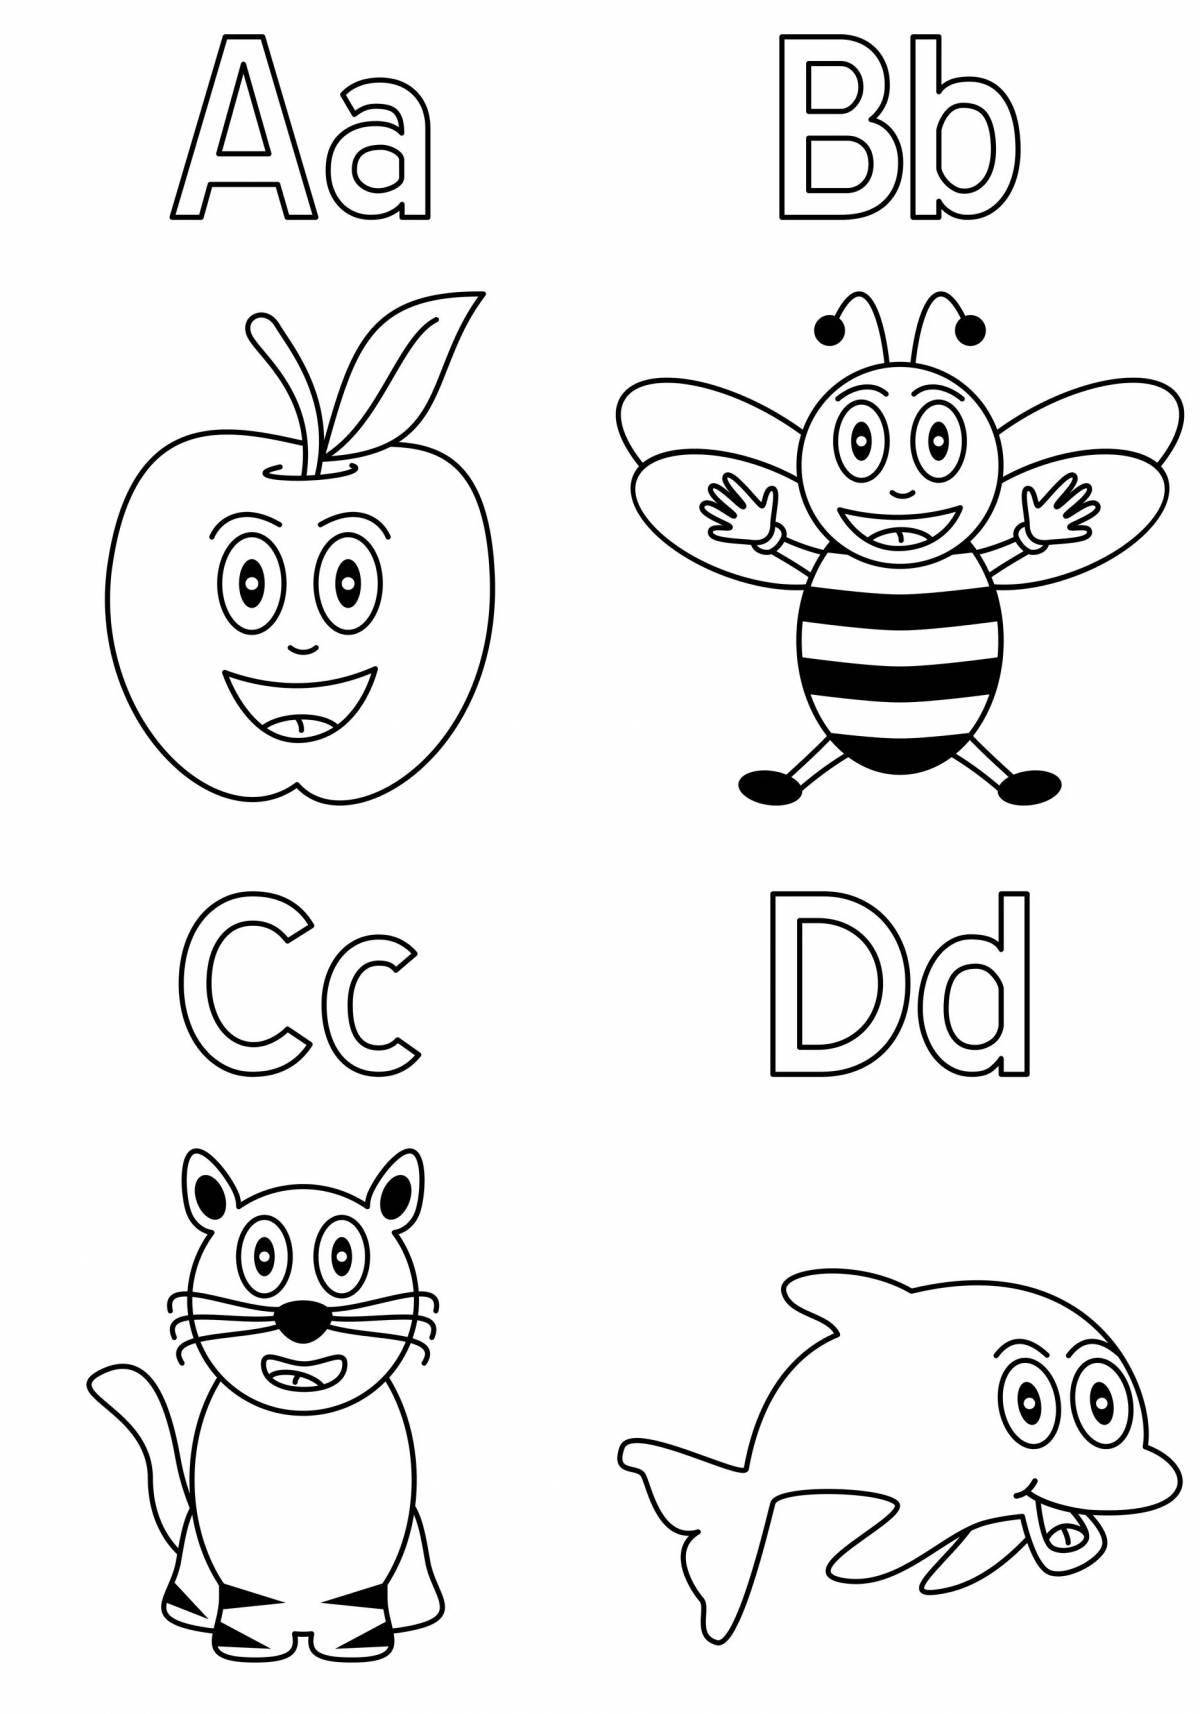 Charming coloring abcd